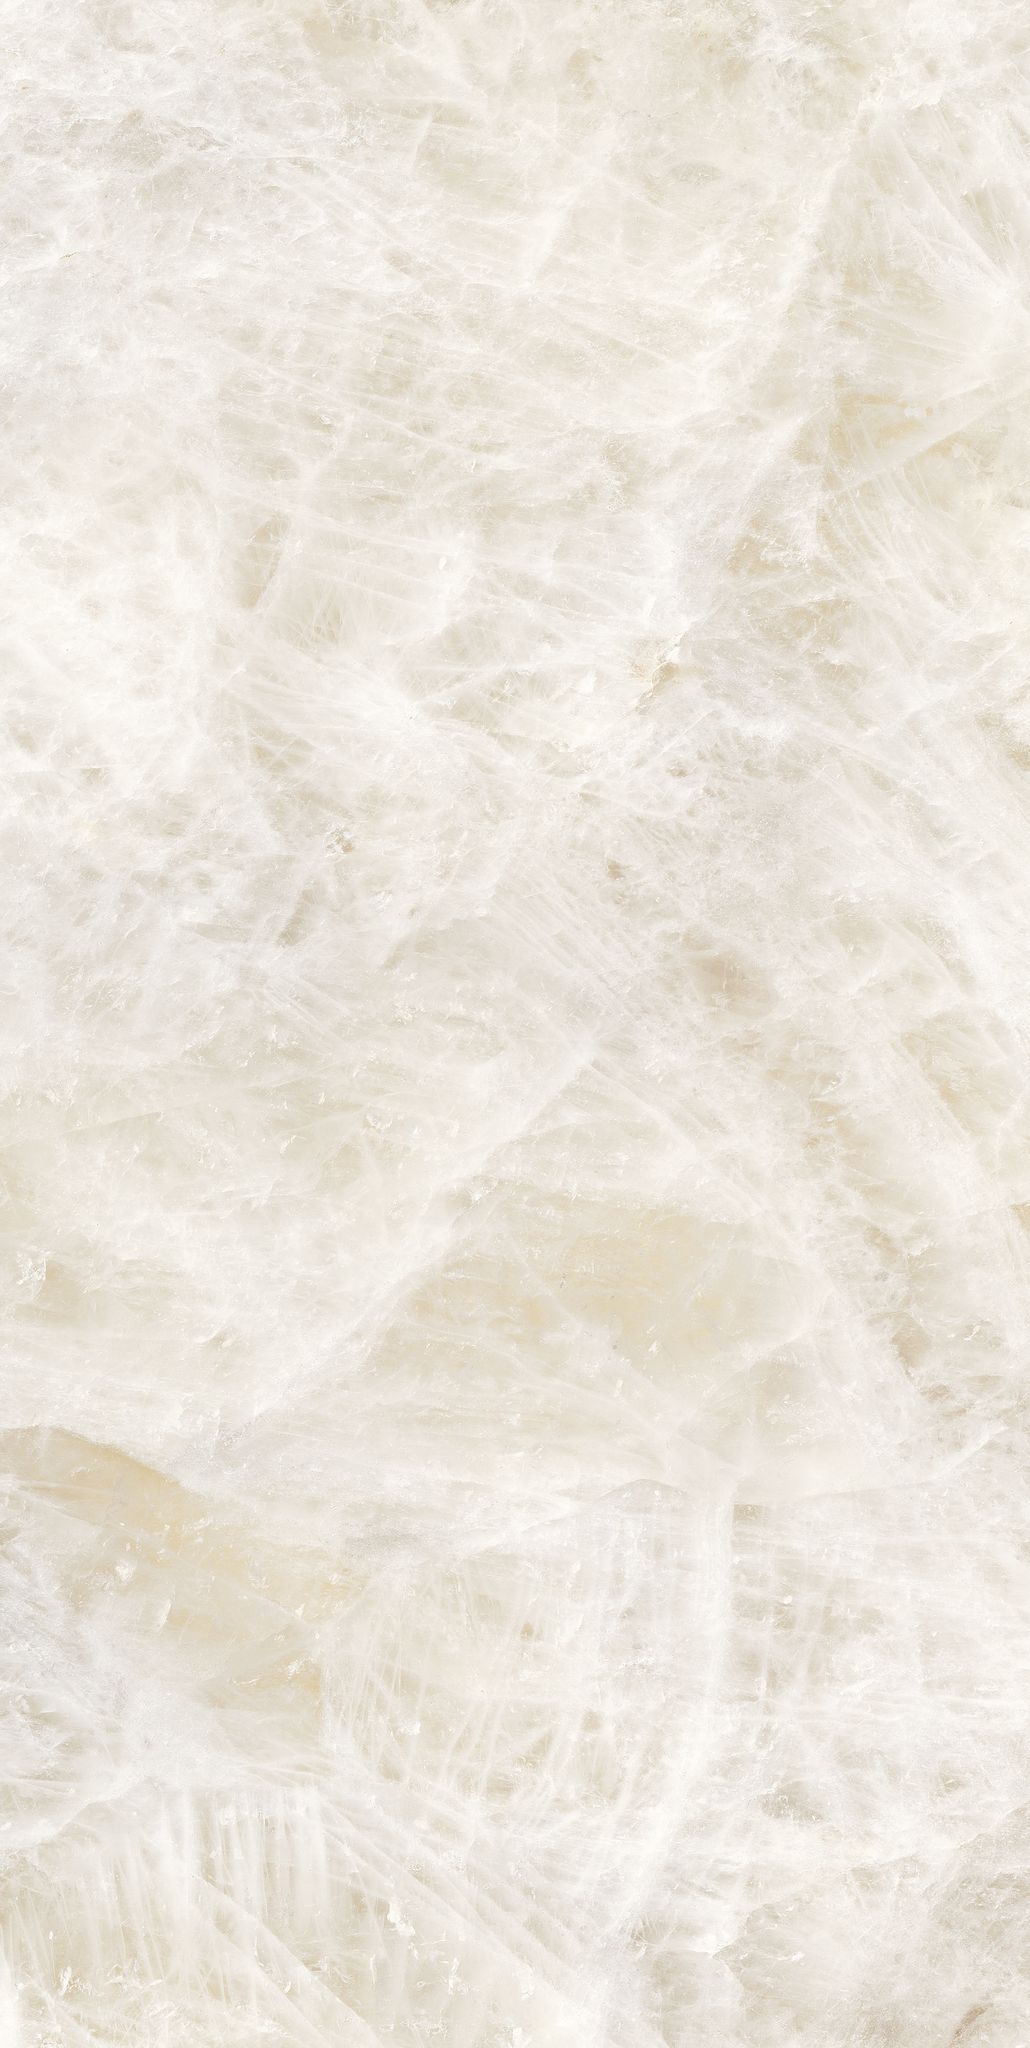 Crystal Ambra | Stones And More | Finest selection of Mosaics, Glass, Tile and Stone